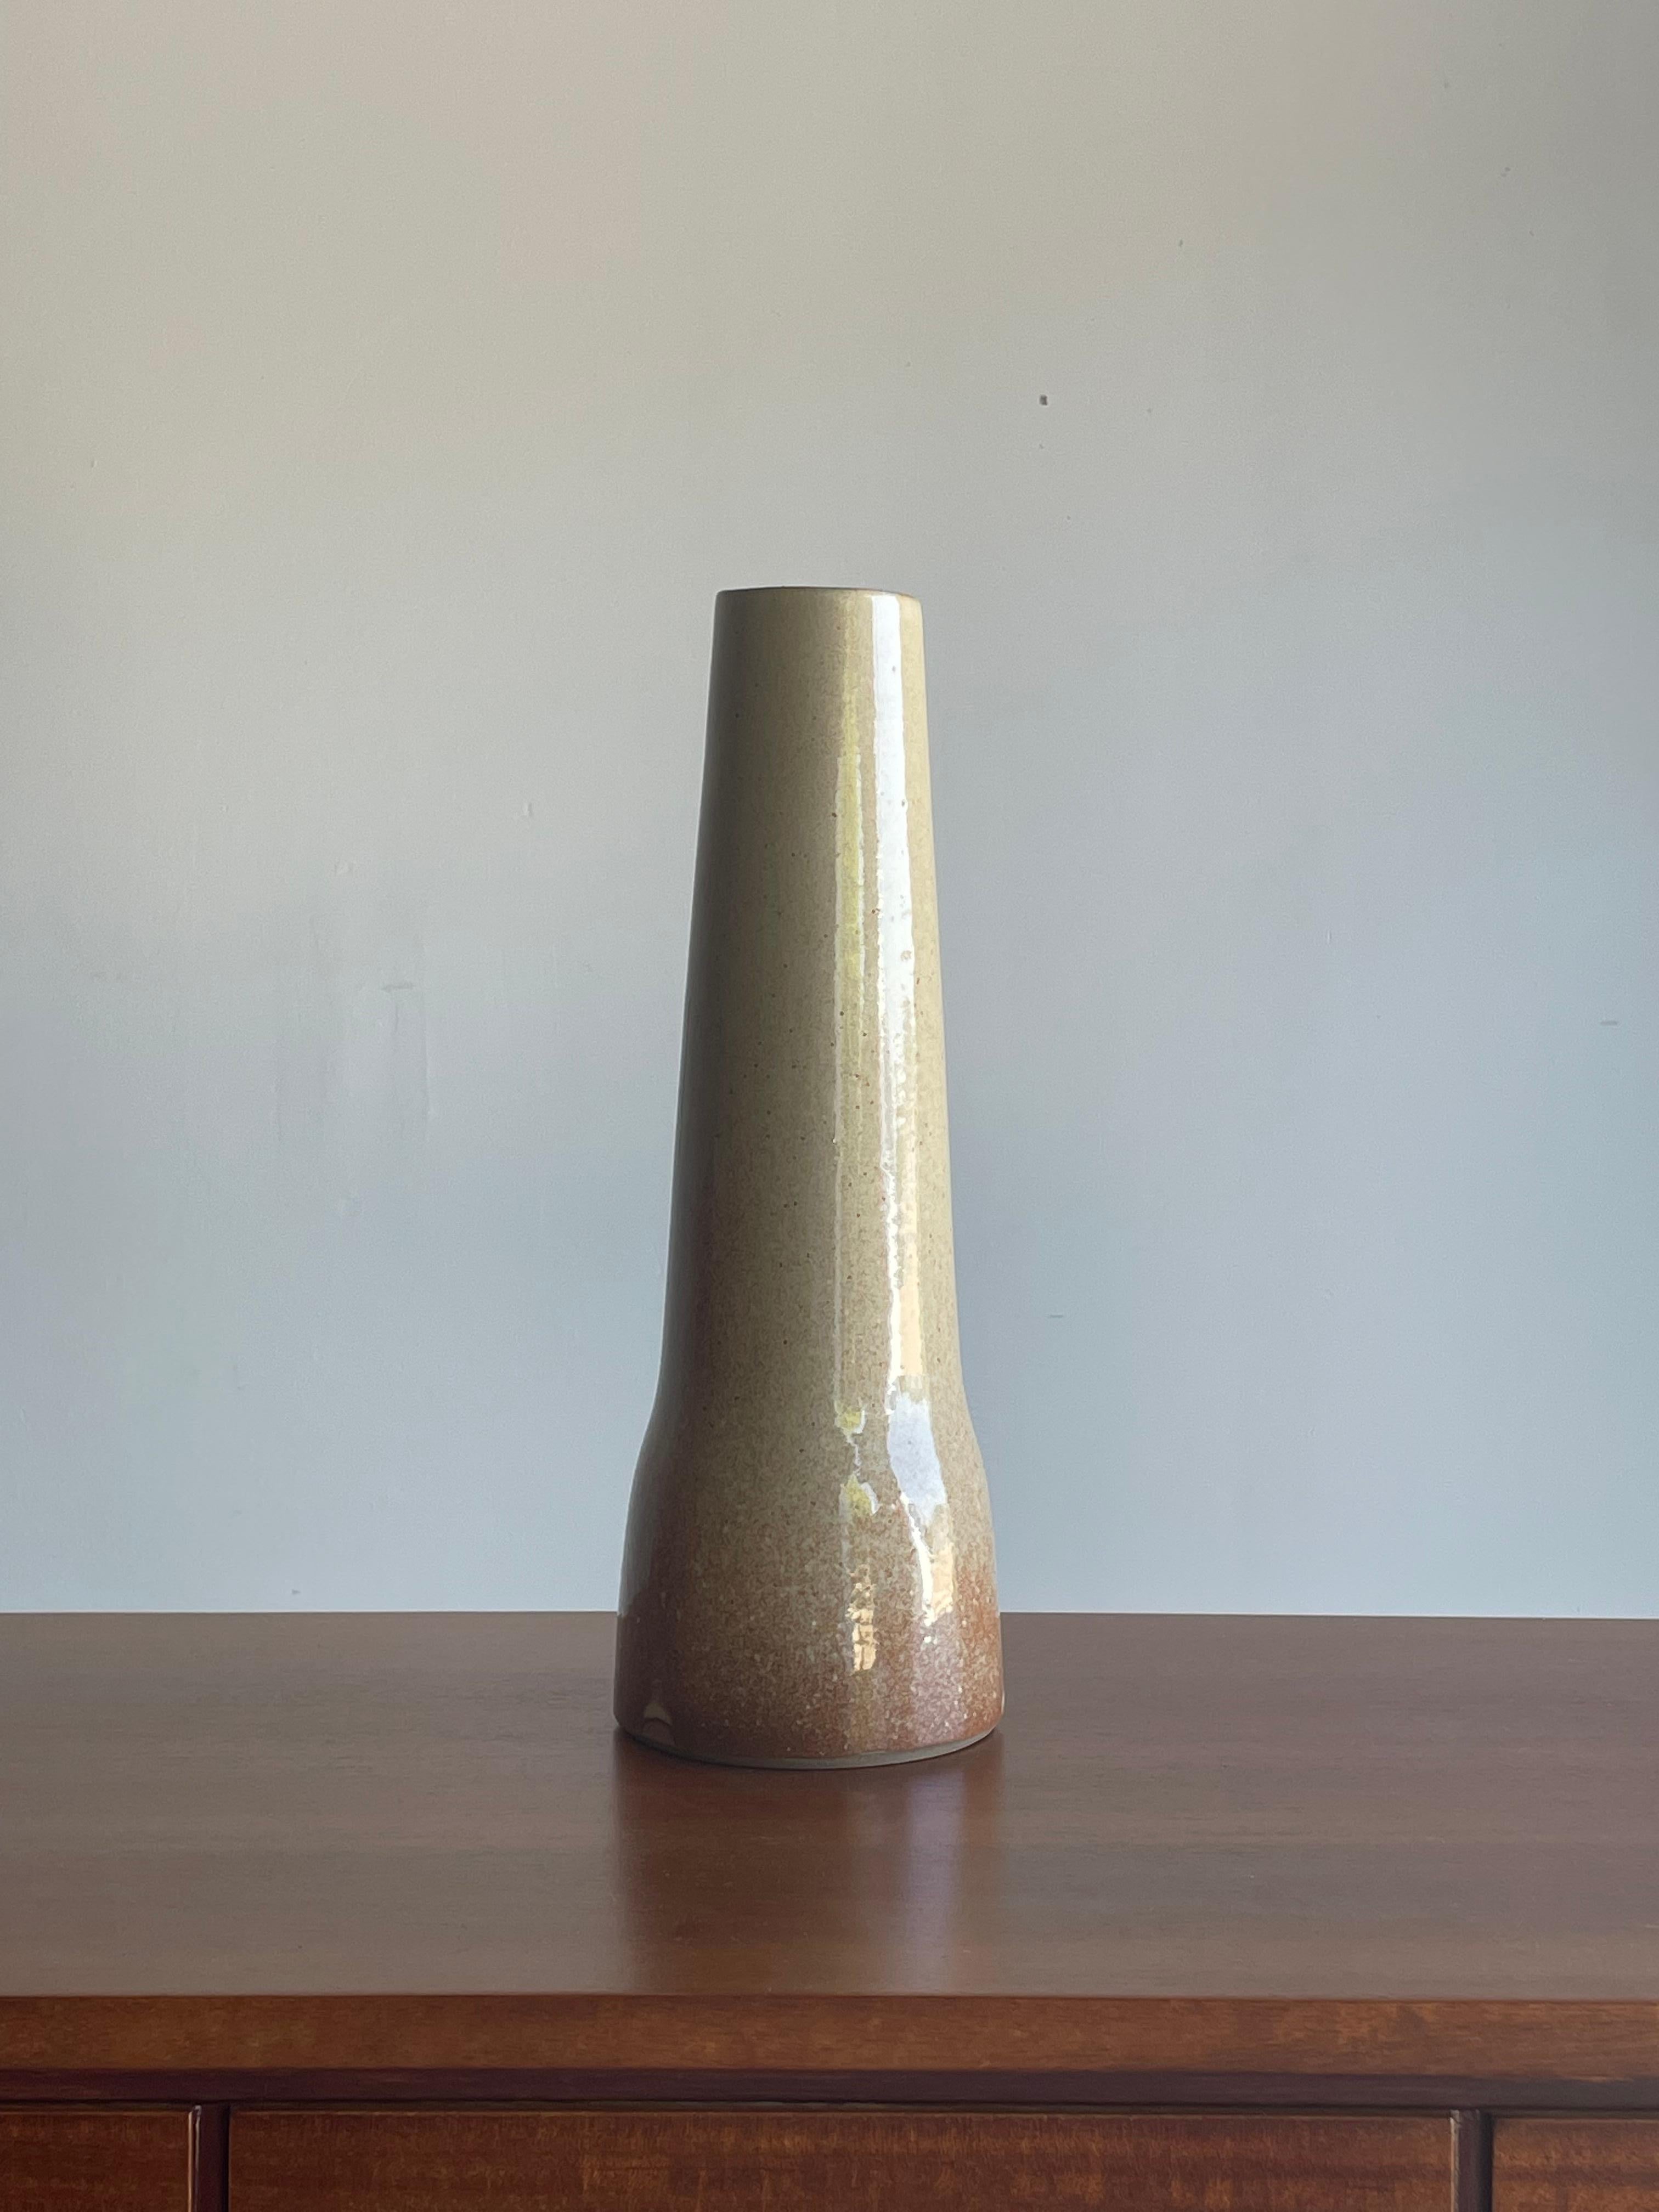 A large vase designed by Jane and Gordon Martz for Marshall Studios in a blush/ rose glaze. Famous for their highly desirable ceramic table lamps, offered here is a ceramic vase. Wonderful color palette. Very good condition, signed on underside.